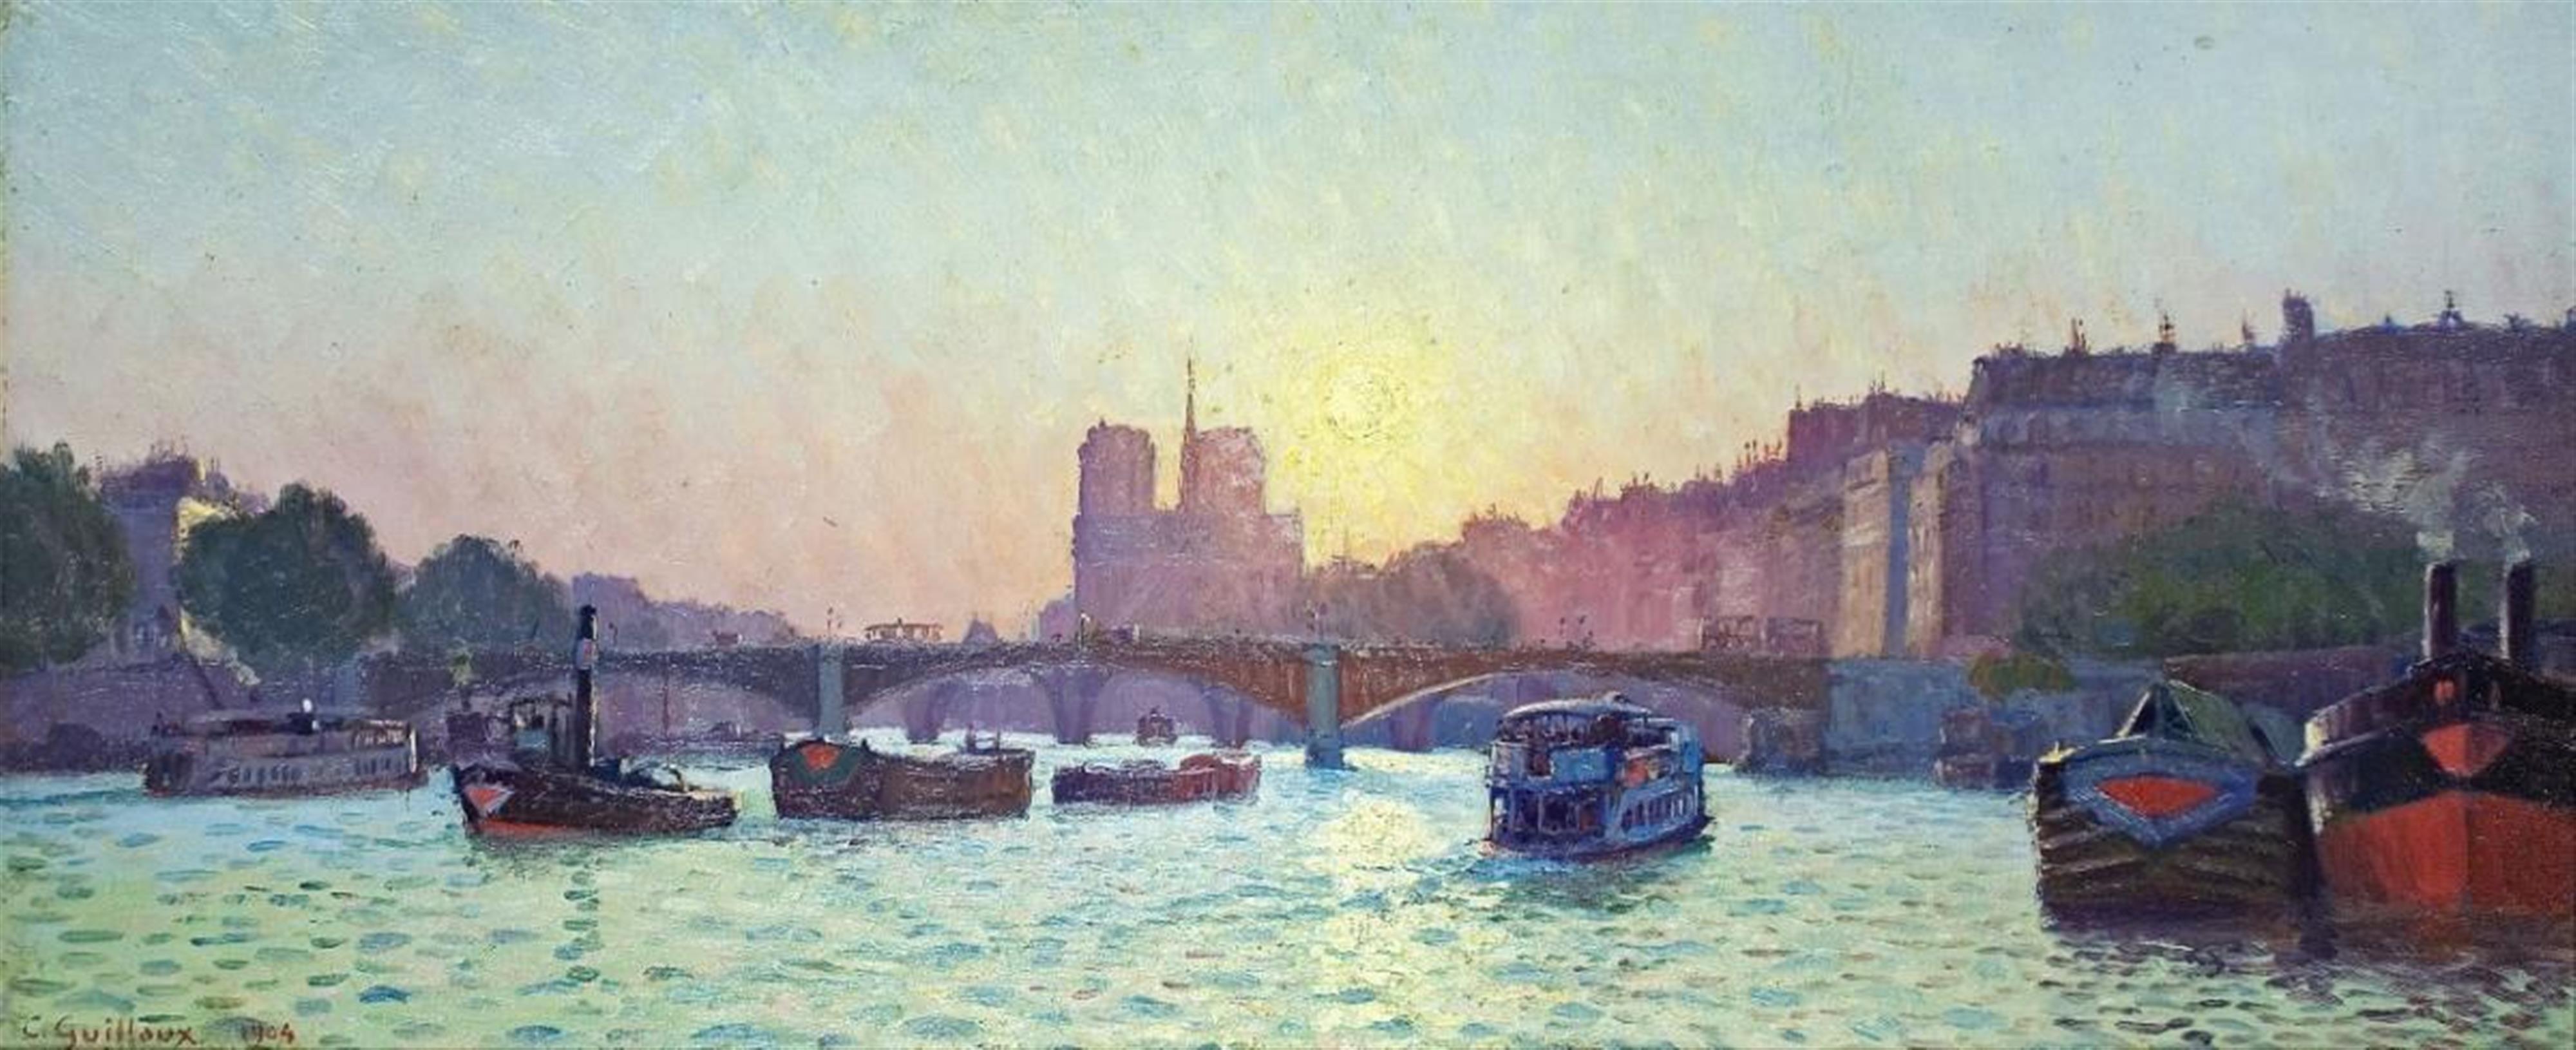 Charles Guilloux - VIEW OF PARIS WITH NOTRE-DAME AND PONT-NEUF - image-1